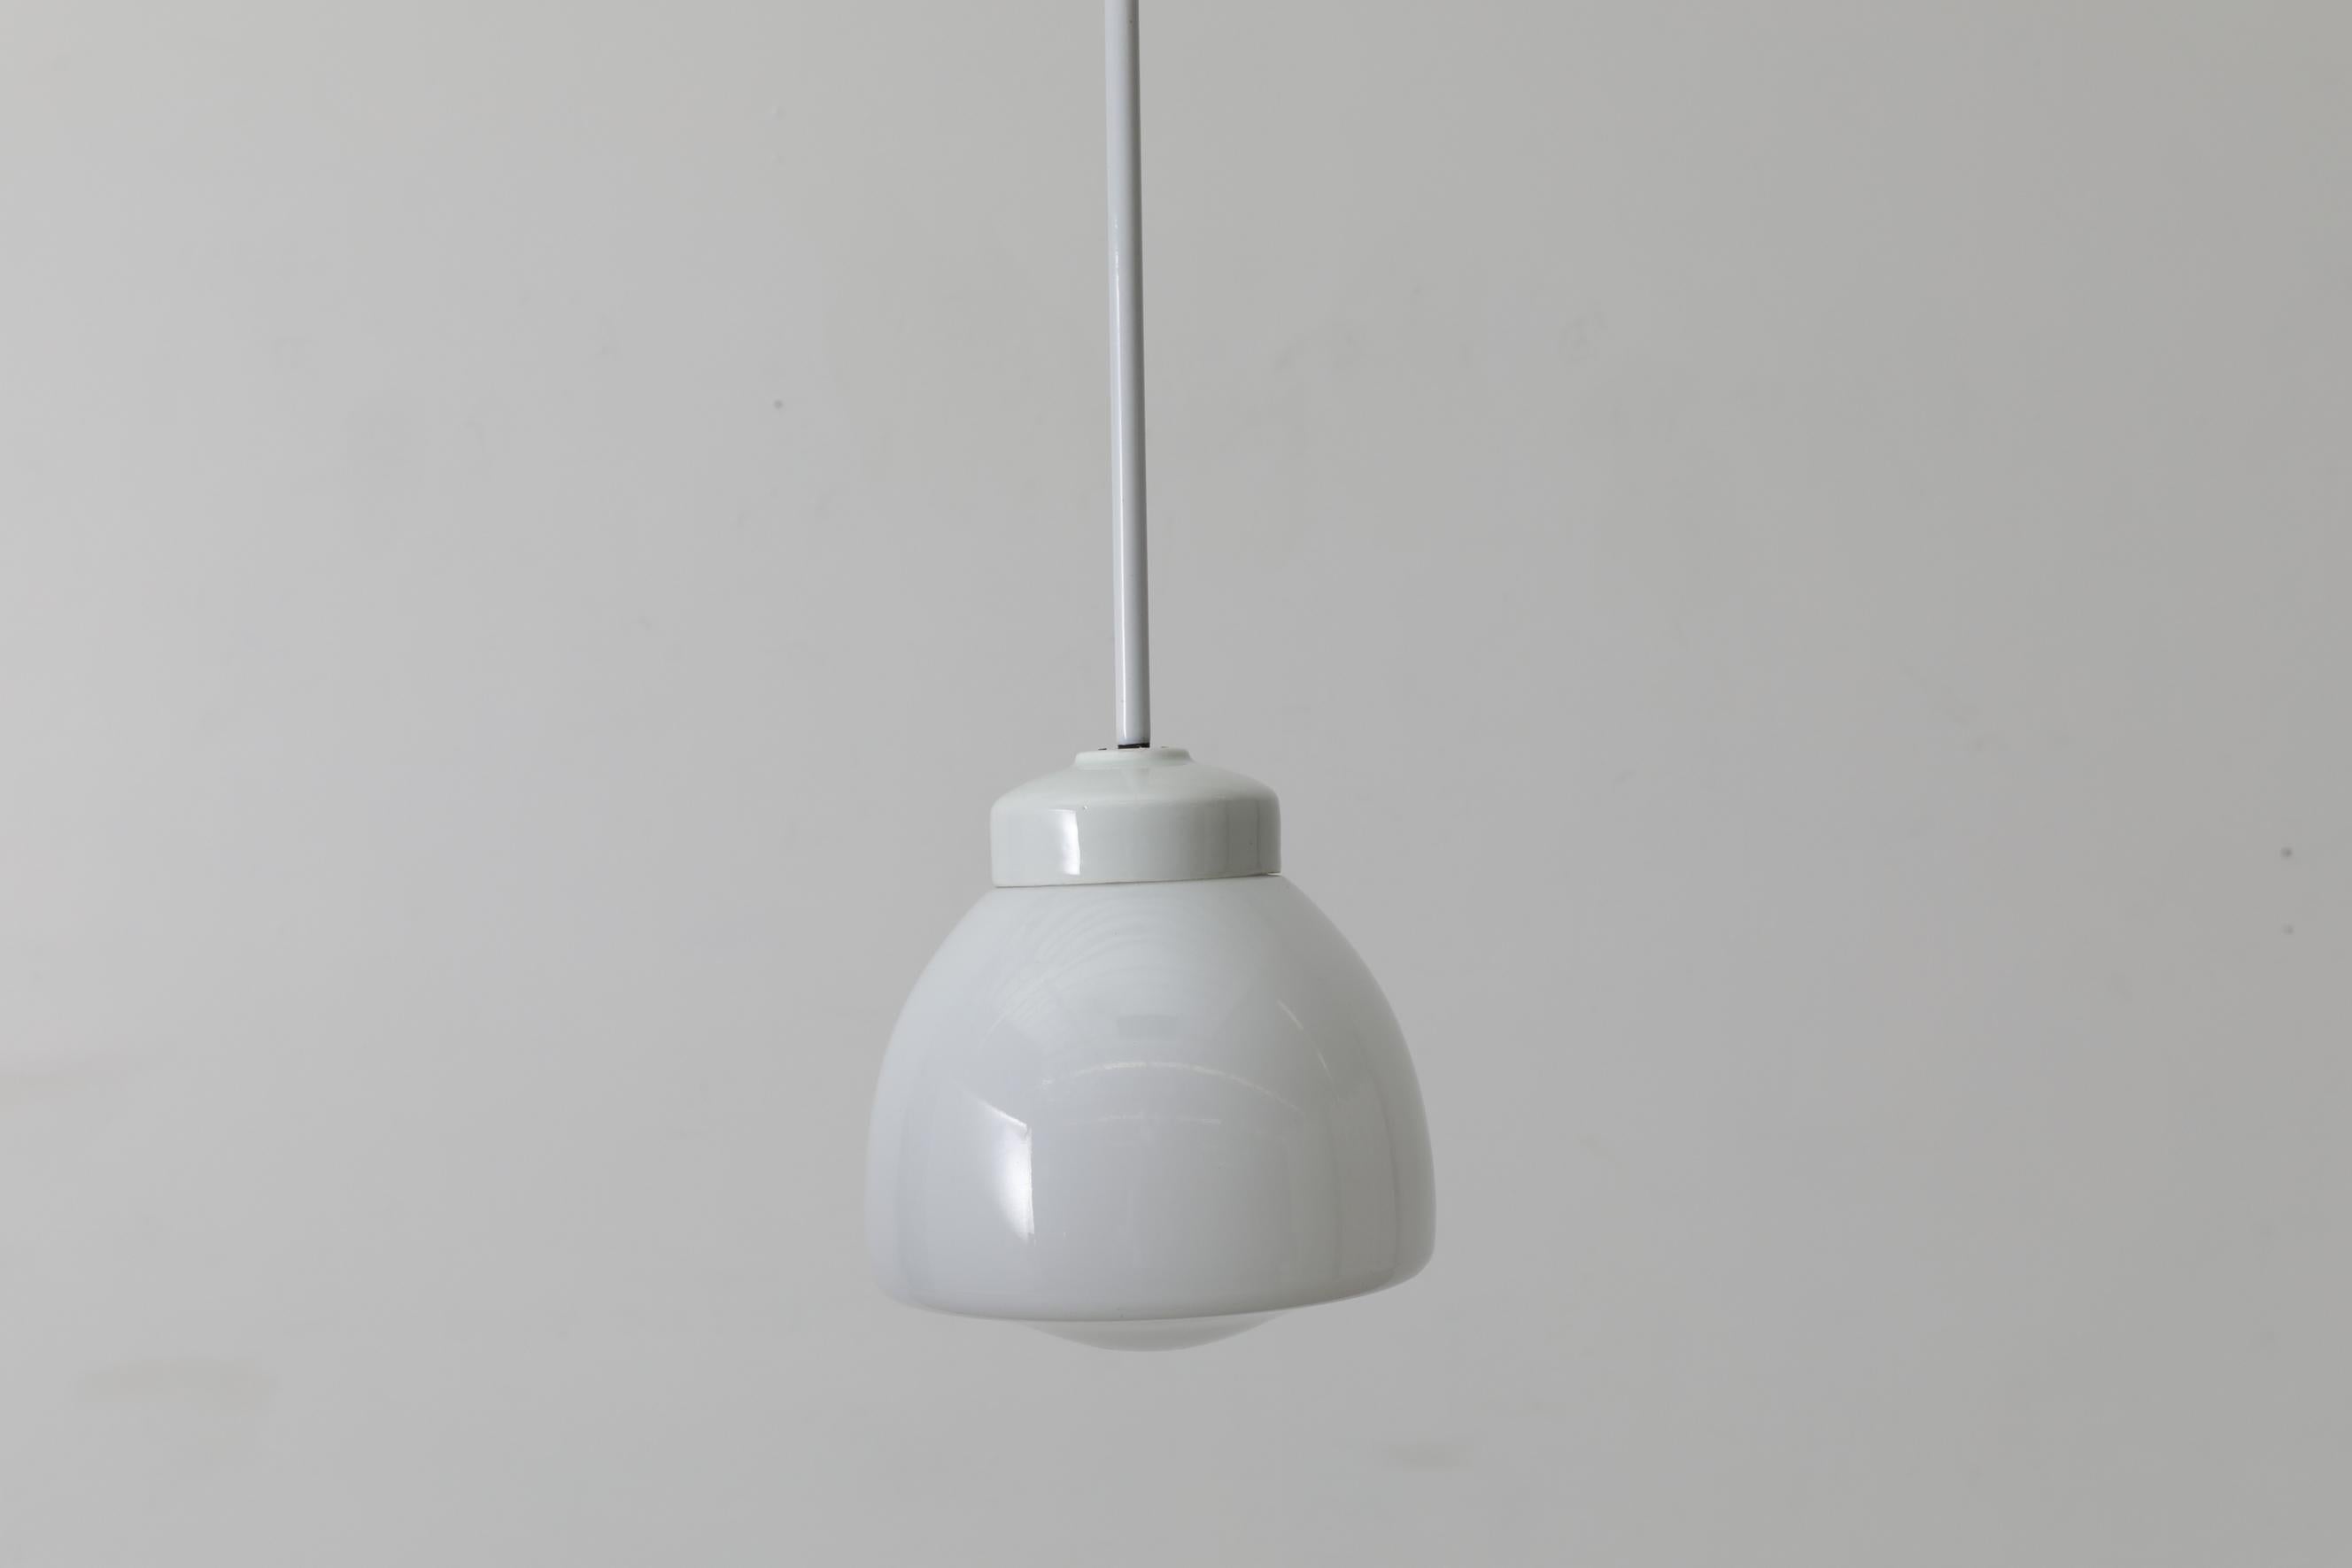 Wagenfeld pendant with vintage opaline glass shade and ceramic mount with white enameled metal stem. In good original condition with light signs of wear, consistent with its age and use. There is no canopy.